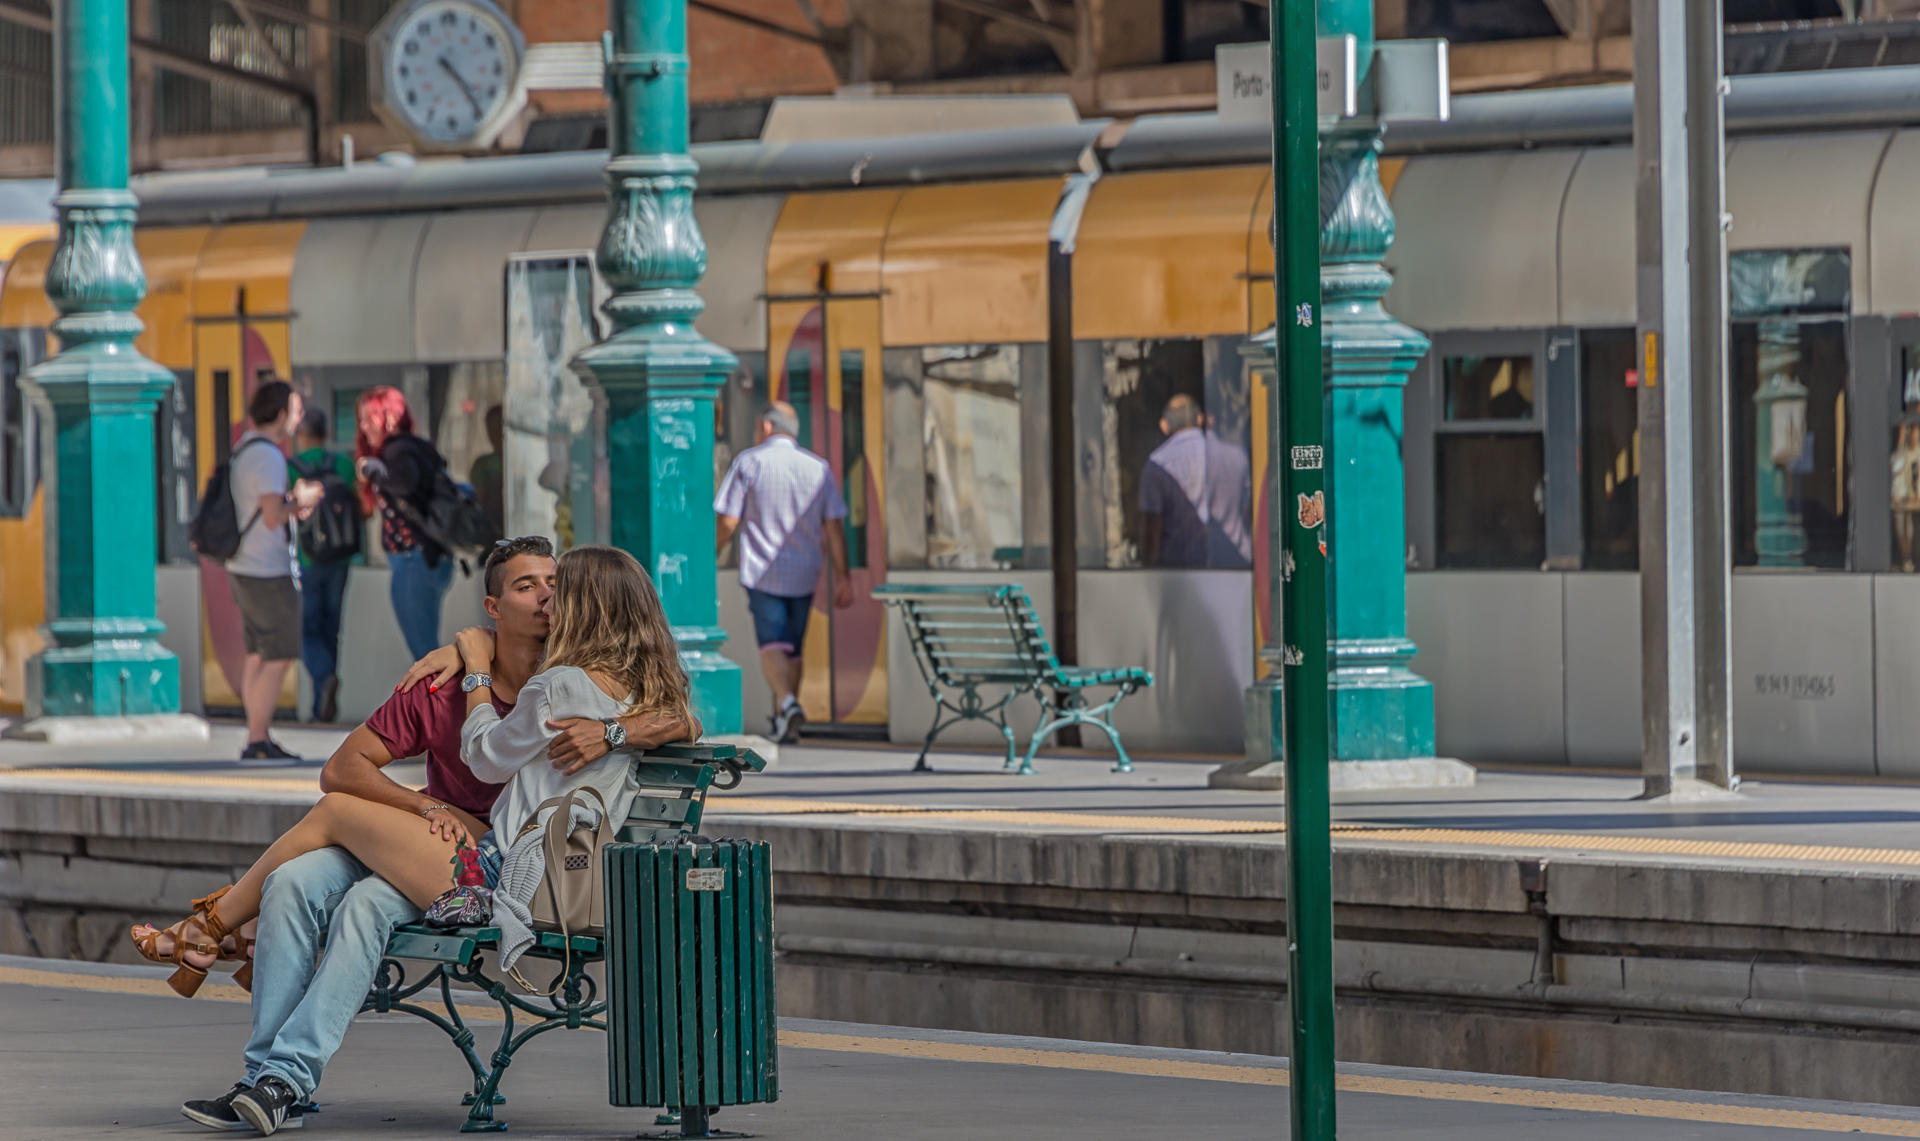 Embrace, Train Station,Portugal : Miscellaneous Mix, Something for Everyone : ELIZABETH SANJUAN PHOTOGRAPHY